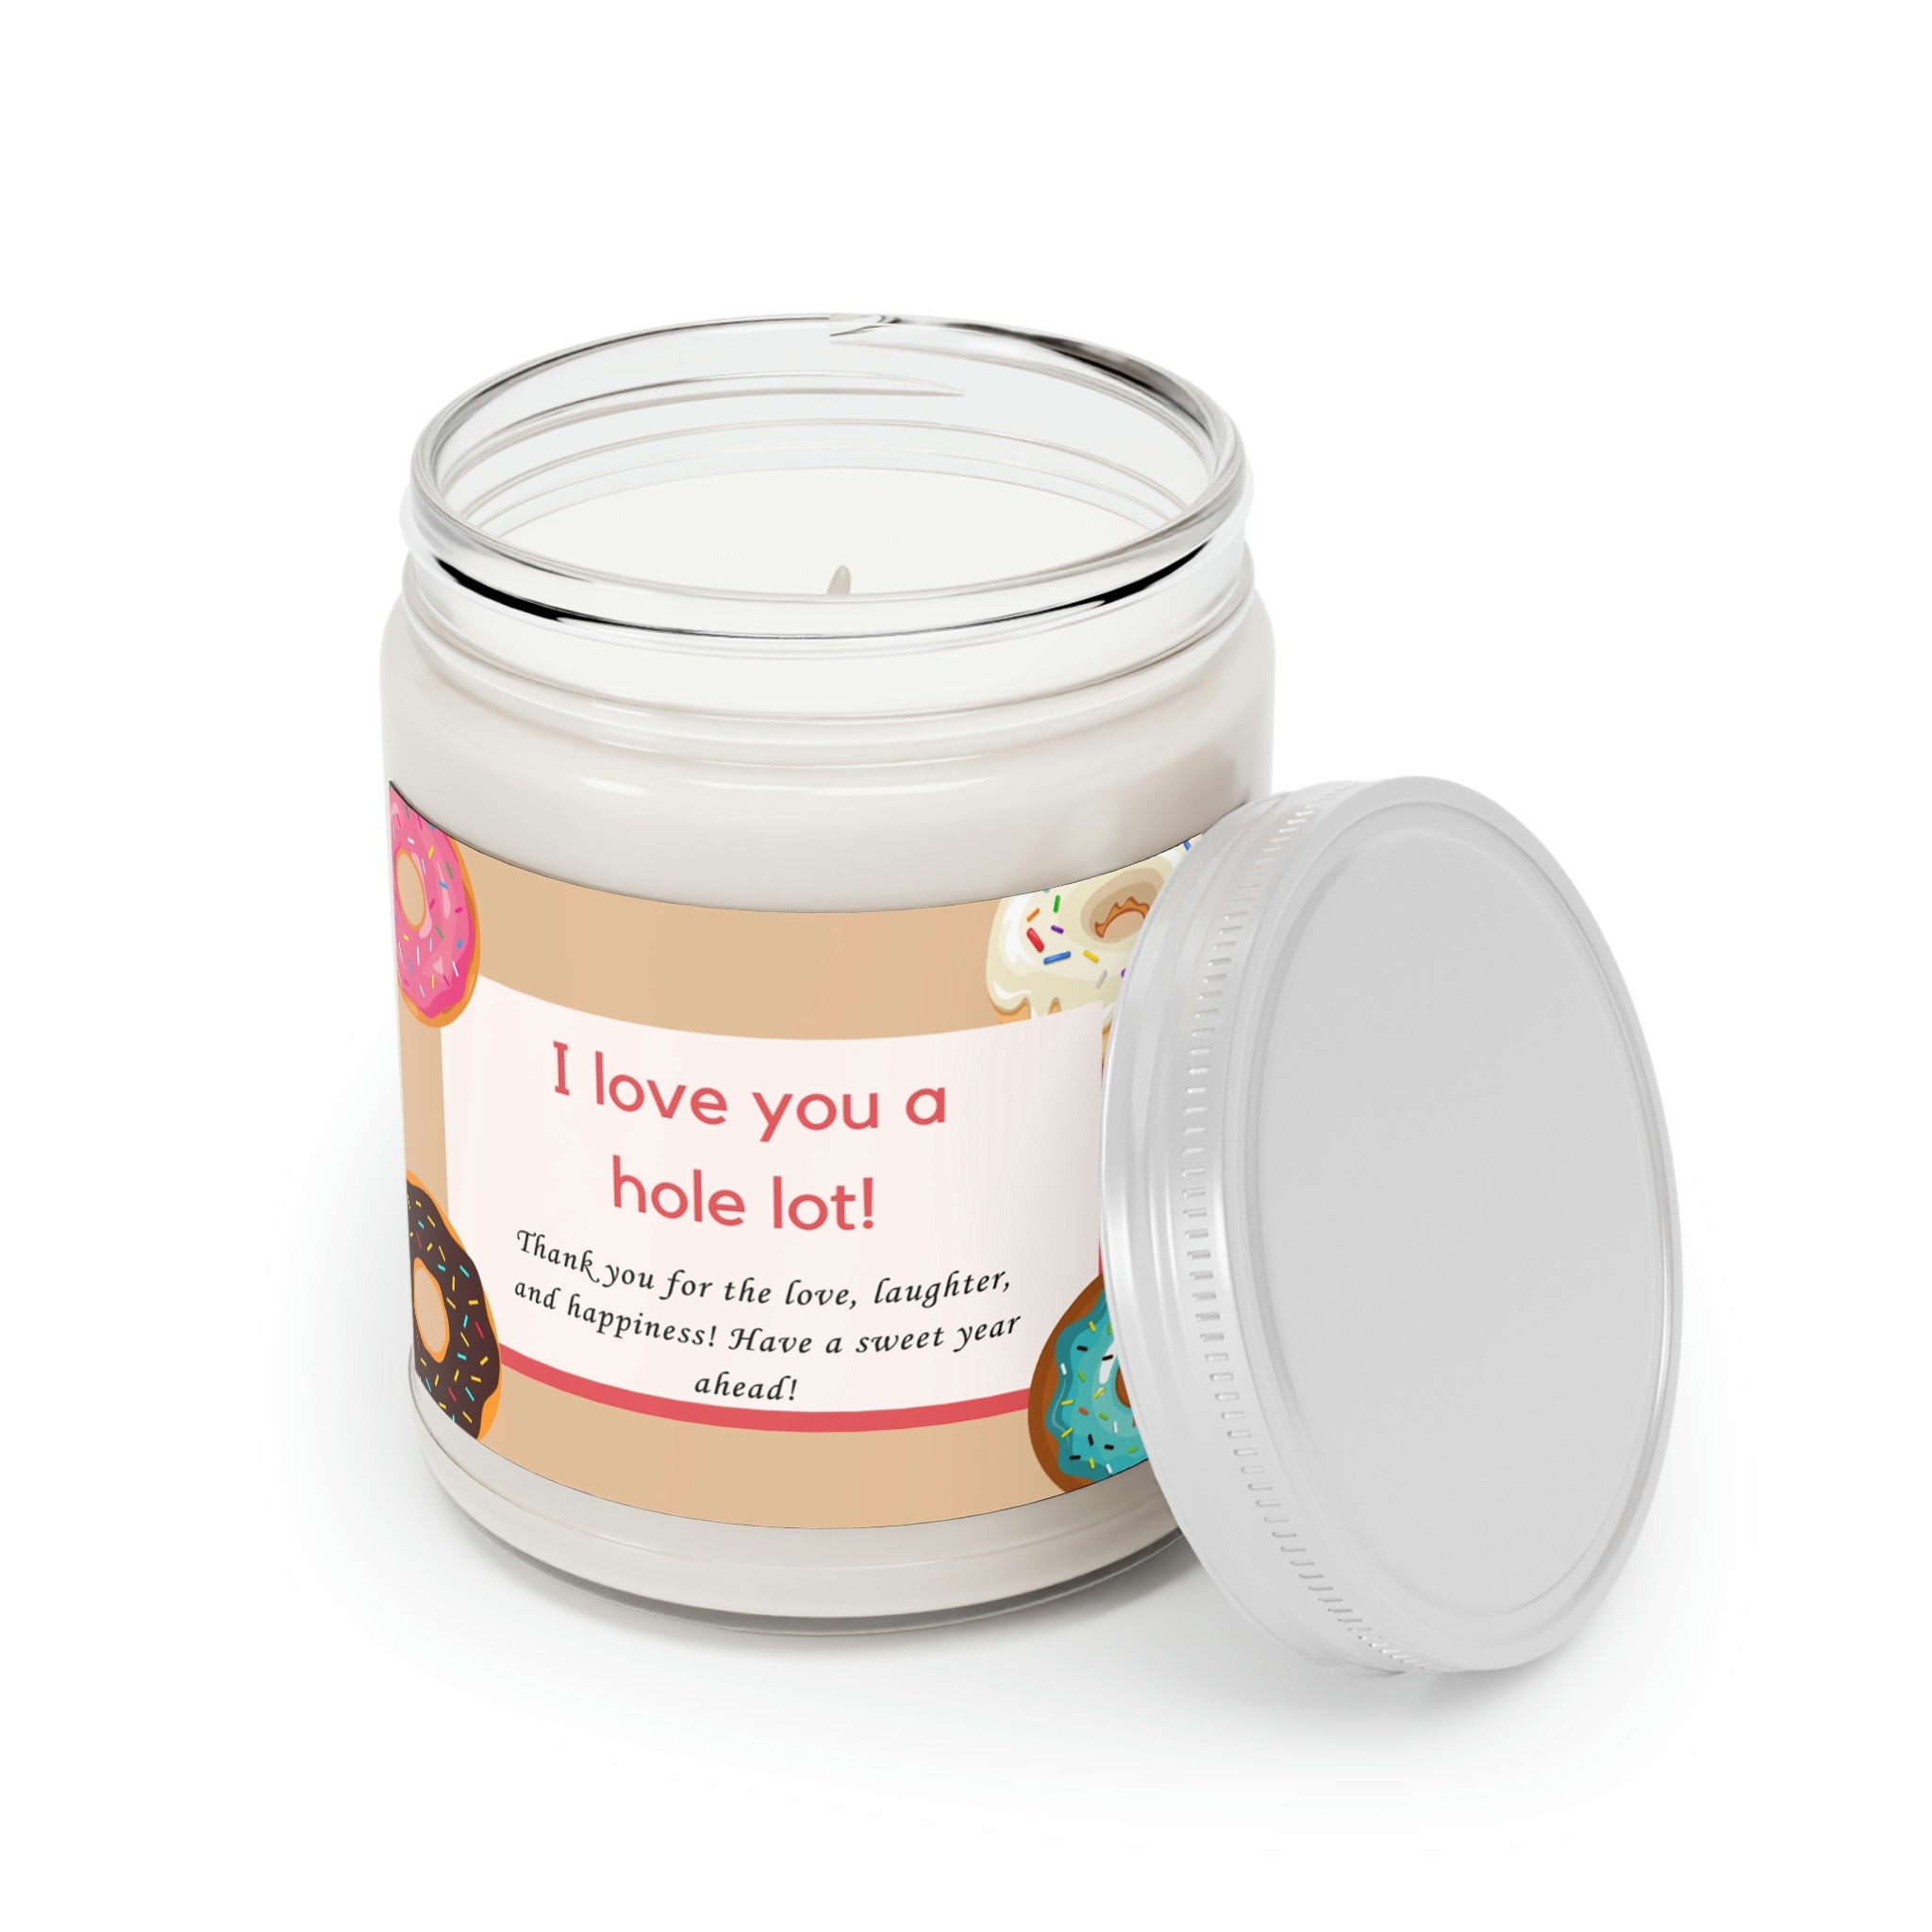 Donut Love Aromatherapy Scented Candle open jar view